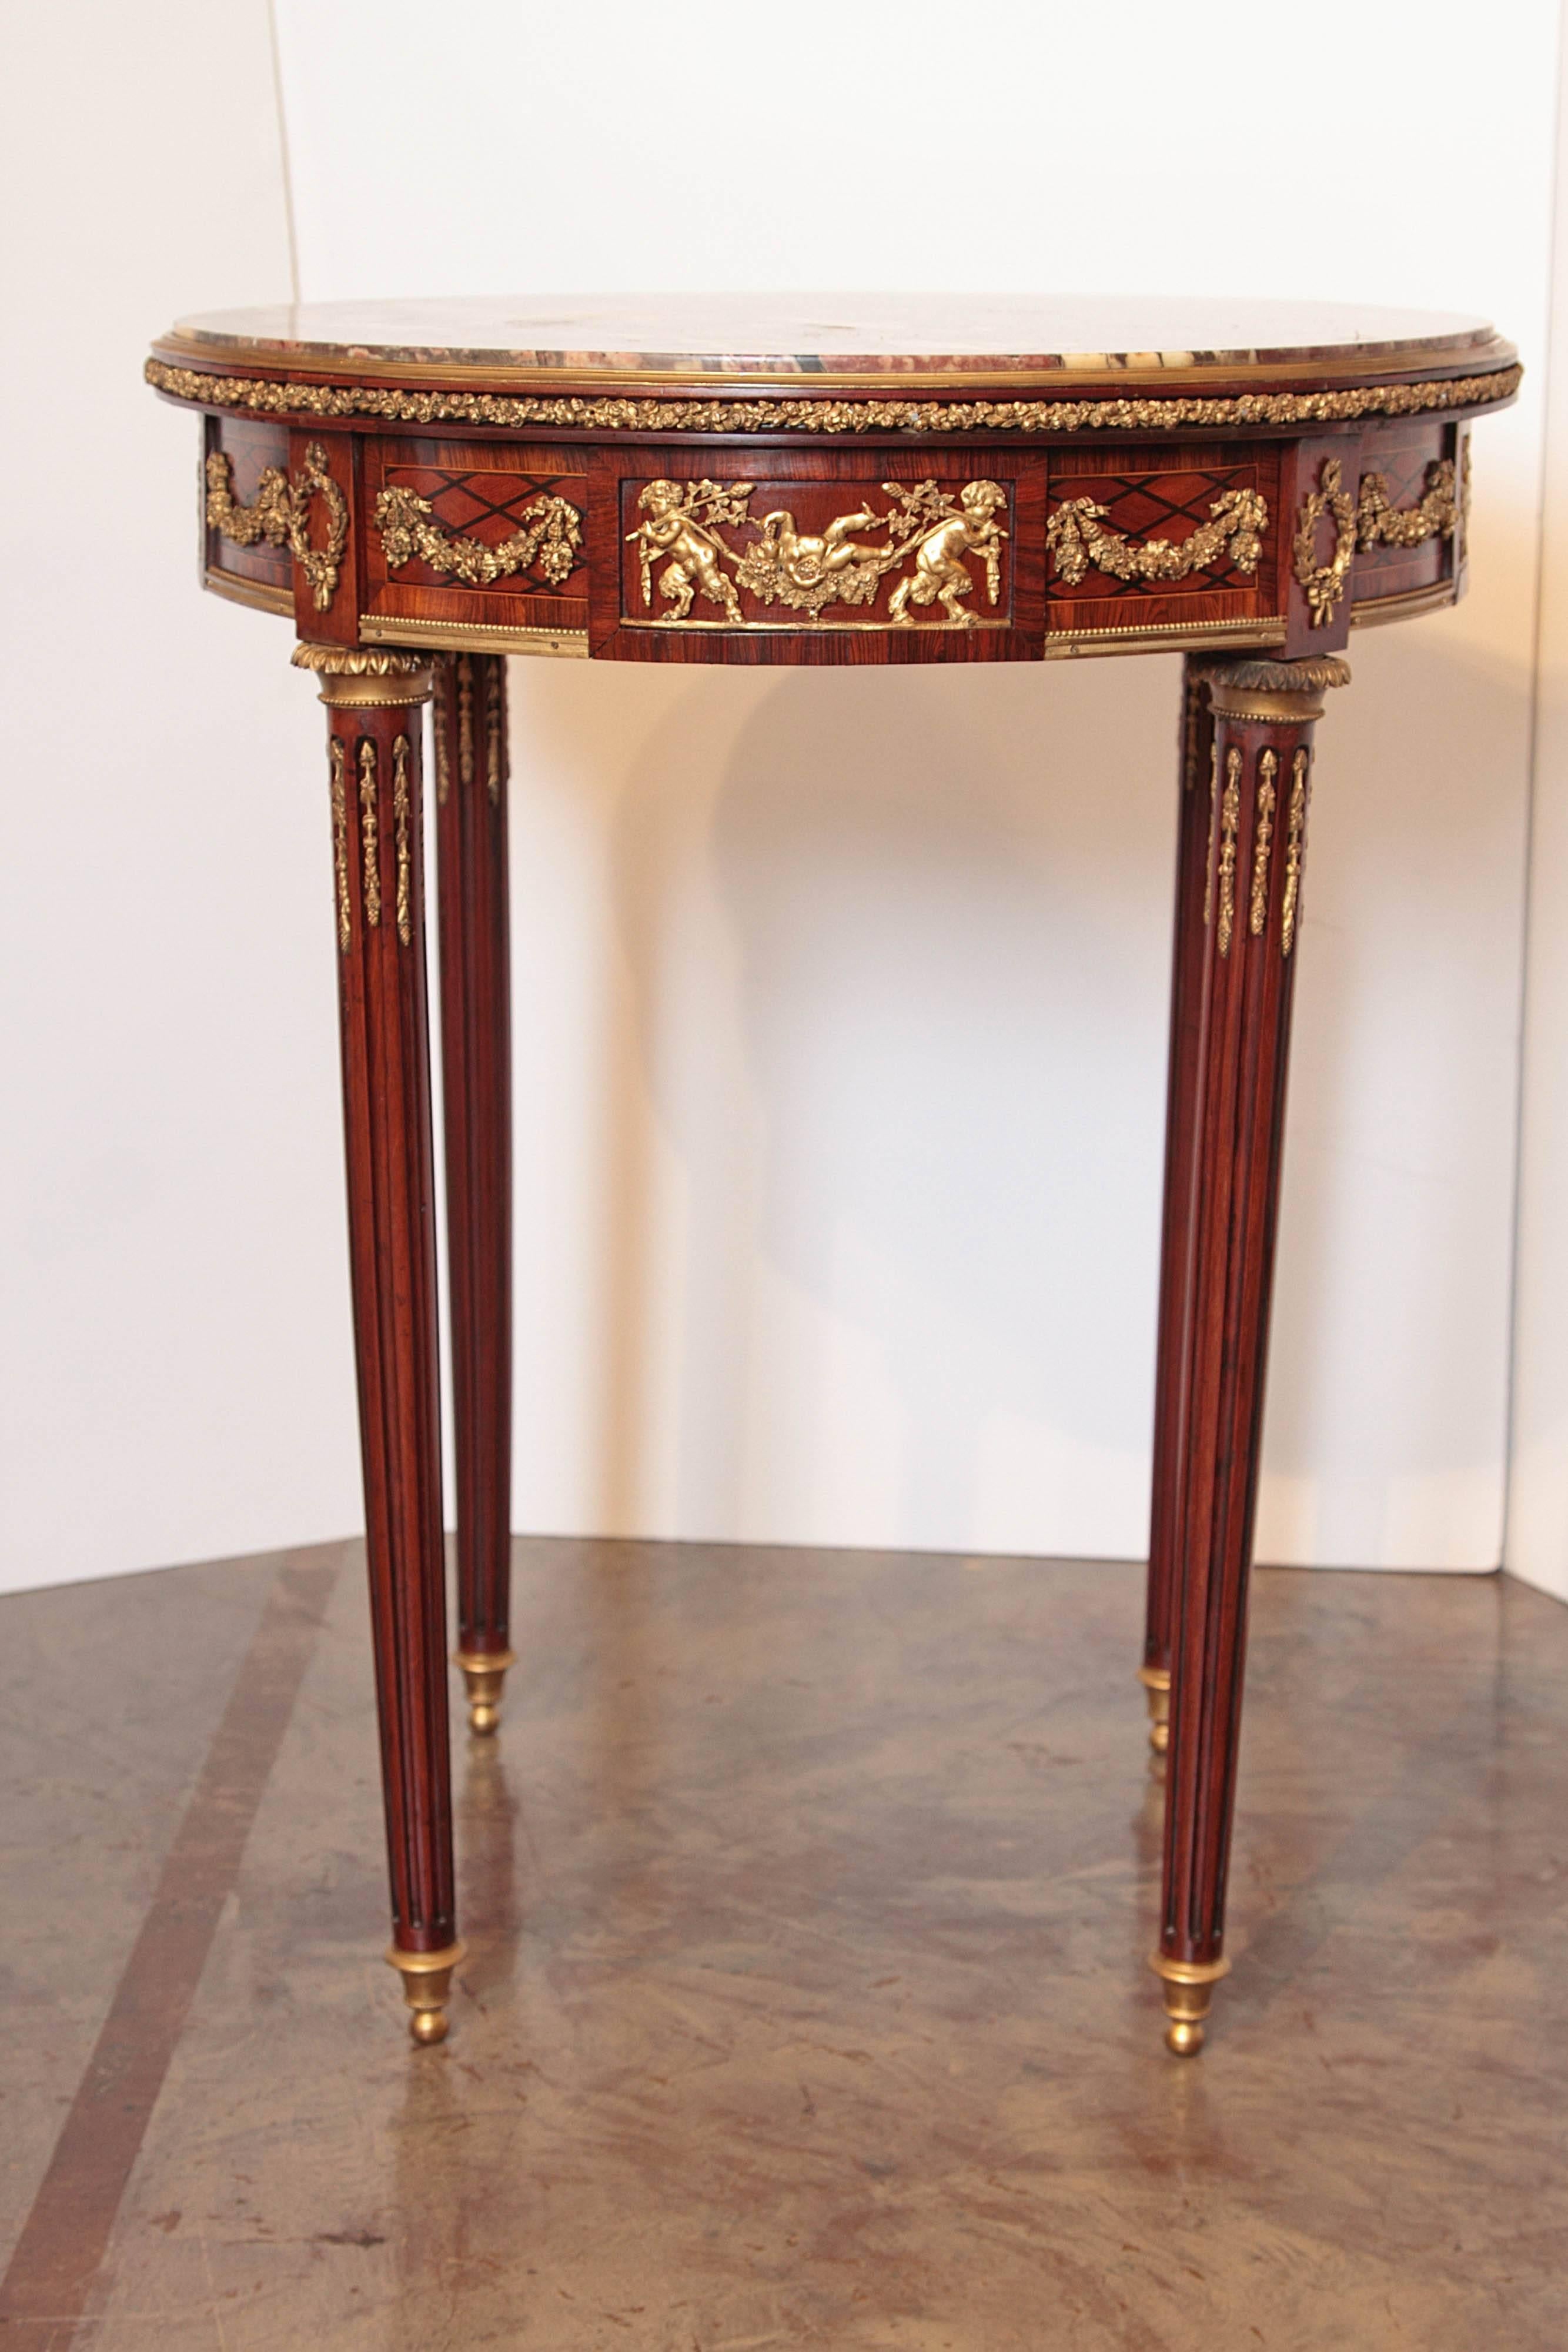 19th century French Louis XVI mahogany and gilt bronze trimmed marble top gueridon table

Fine gilt bronze detail . Original breche violette marble top. Single drawer